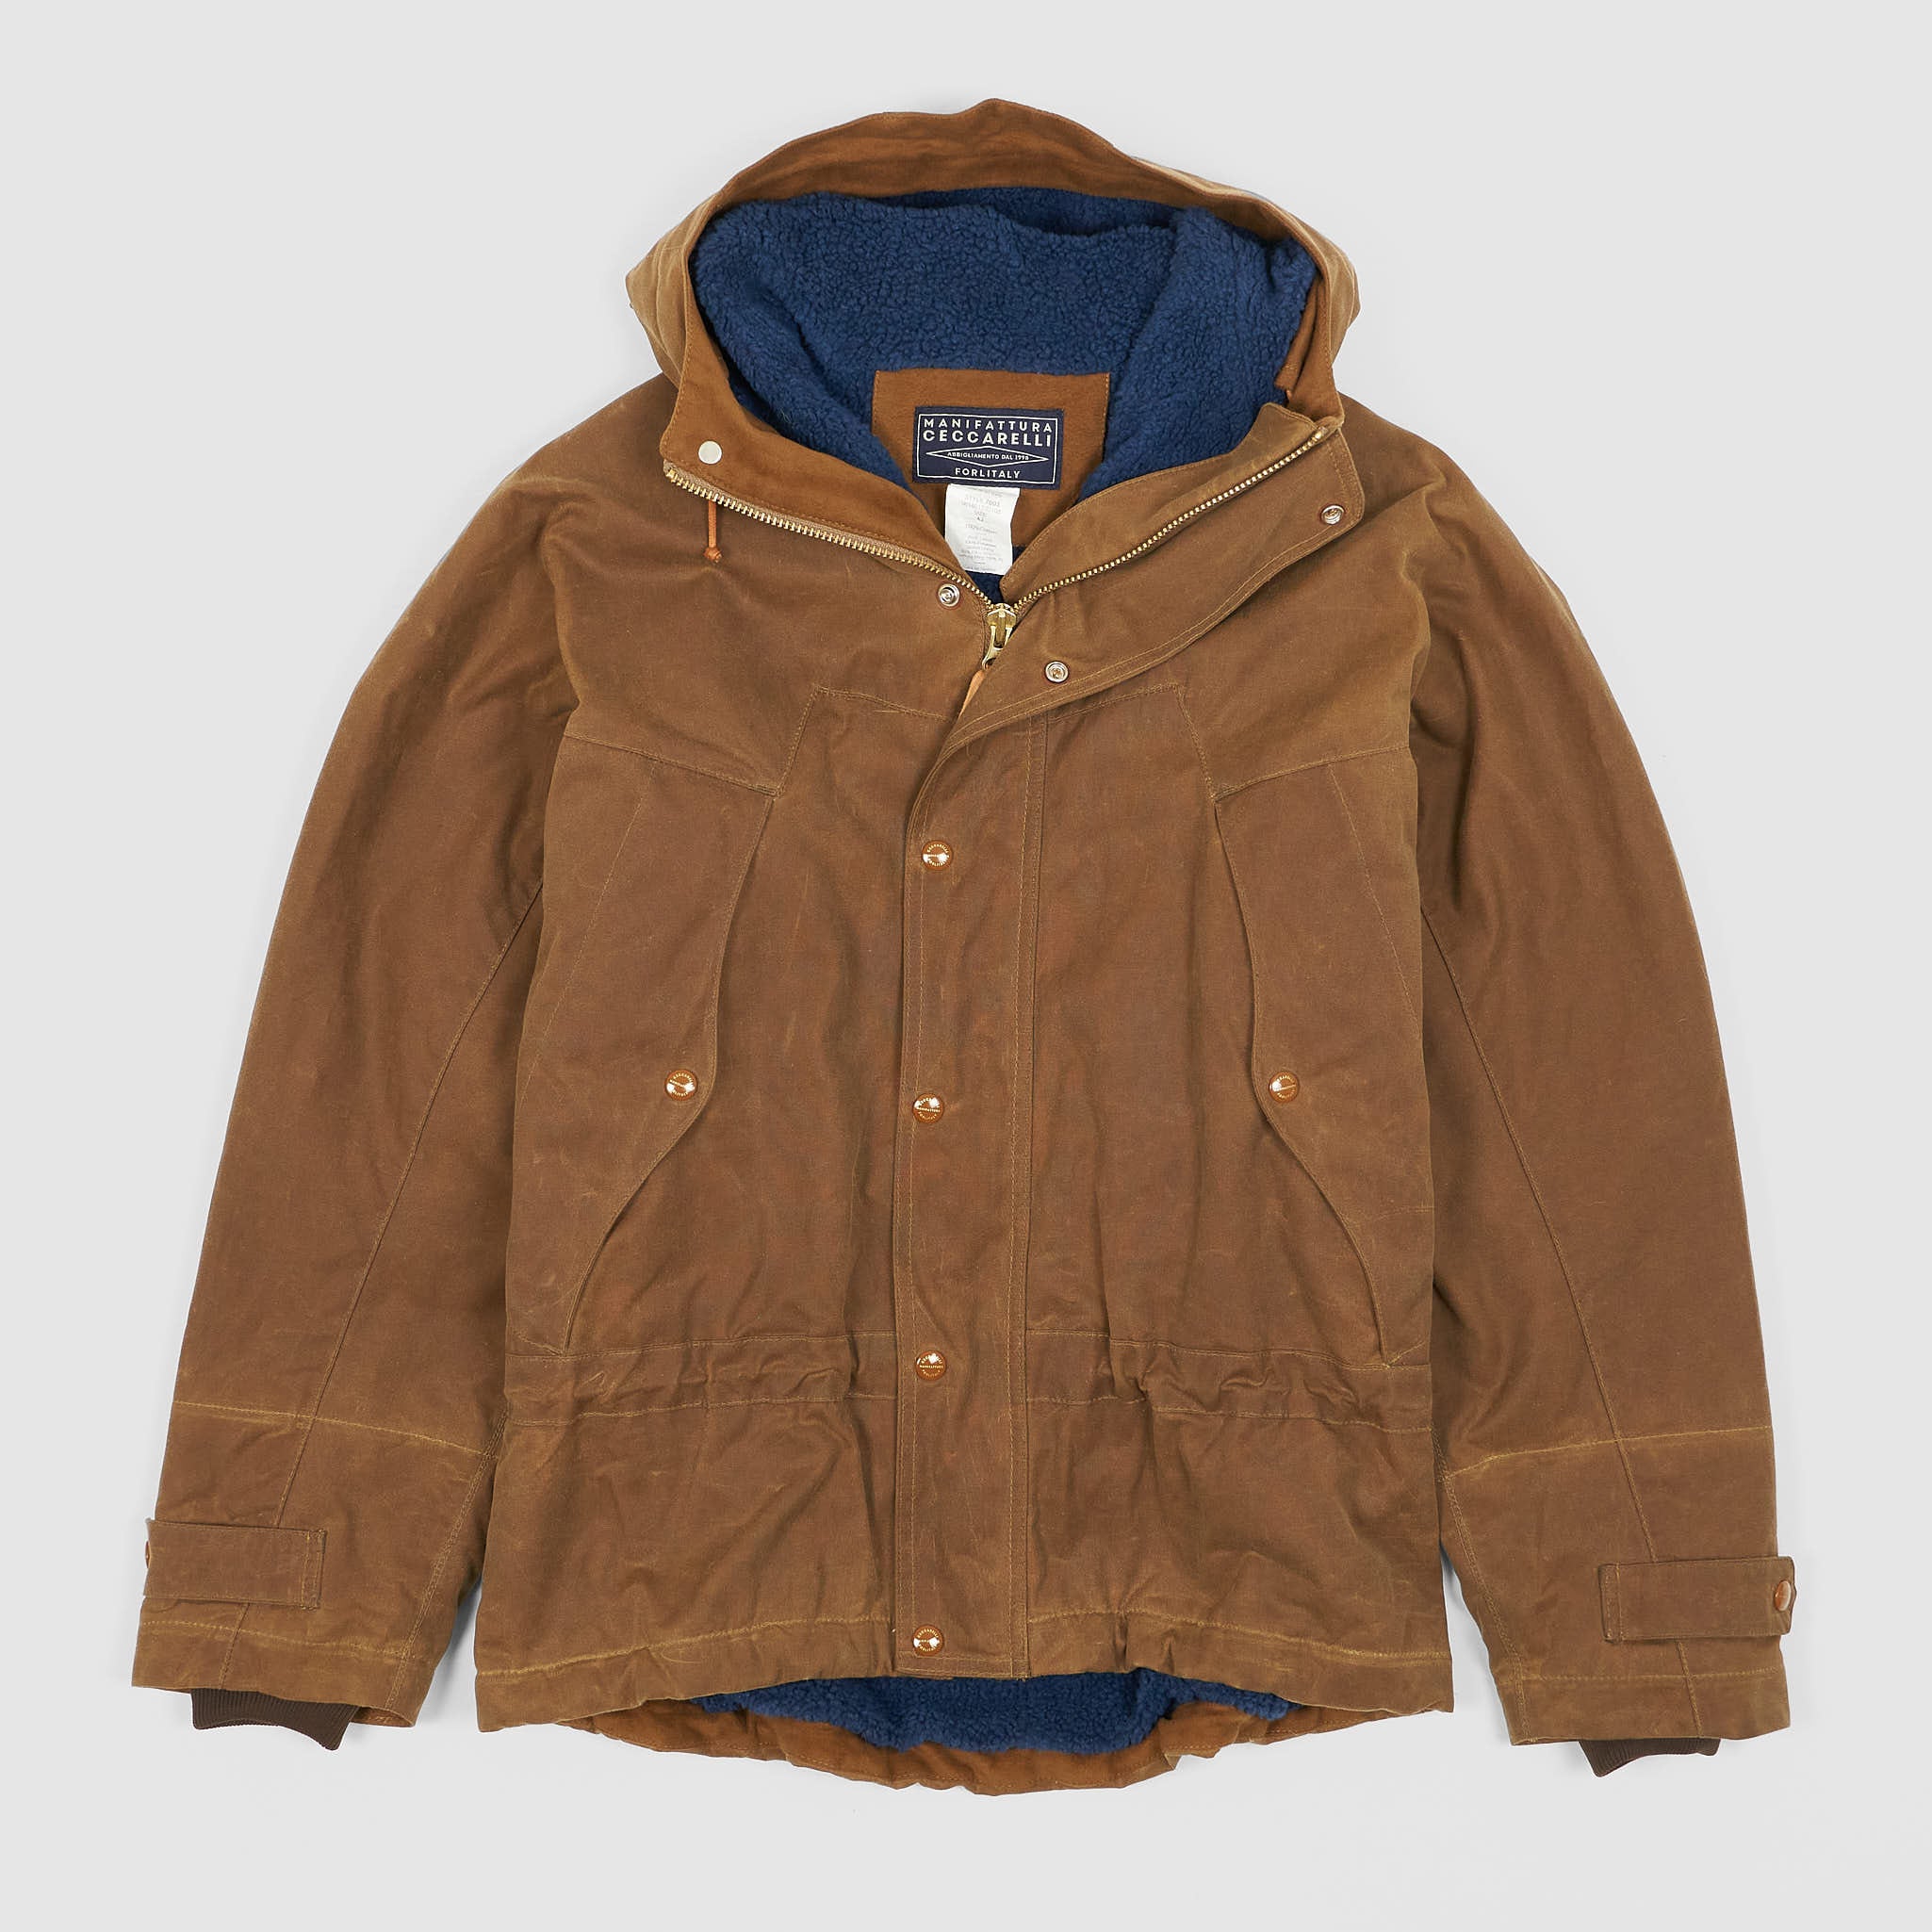 FILSON Wax Fisherman Jacket Brown Cotton Size 38 Used From Japan 